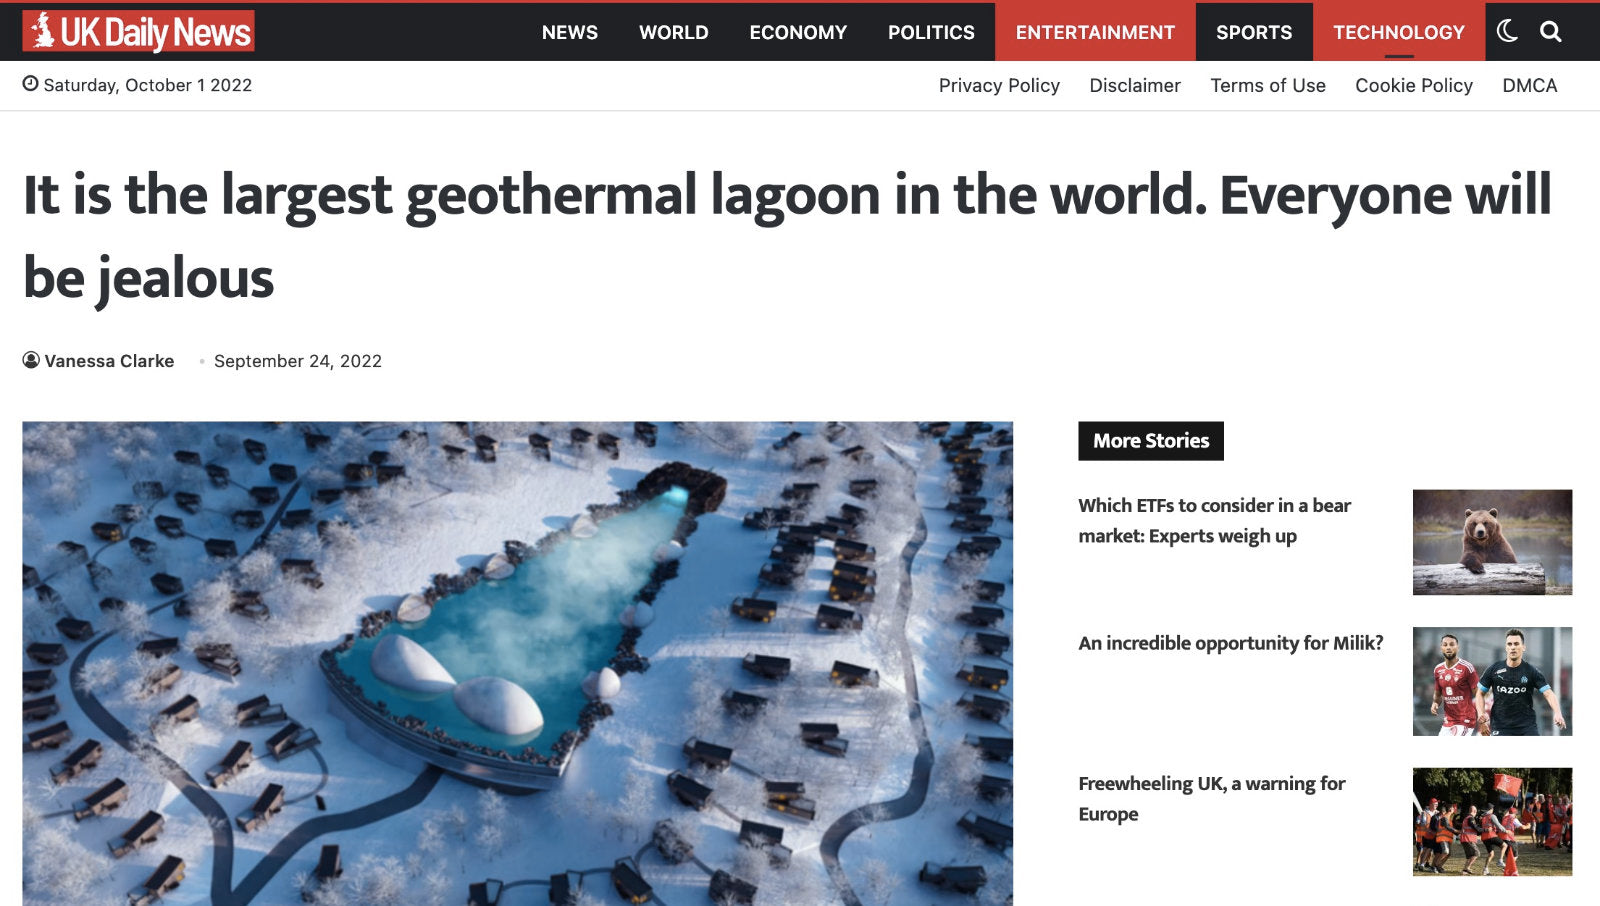 [EN] It is the largest geothermal lagoon in the world. Everyone will be jealous